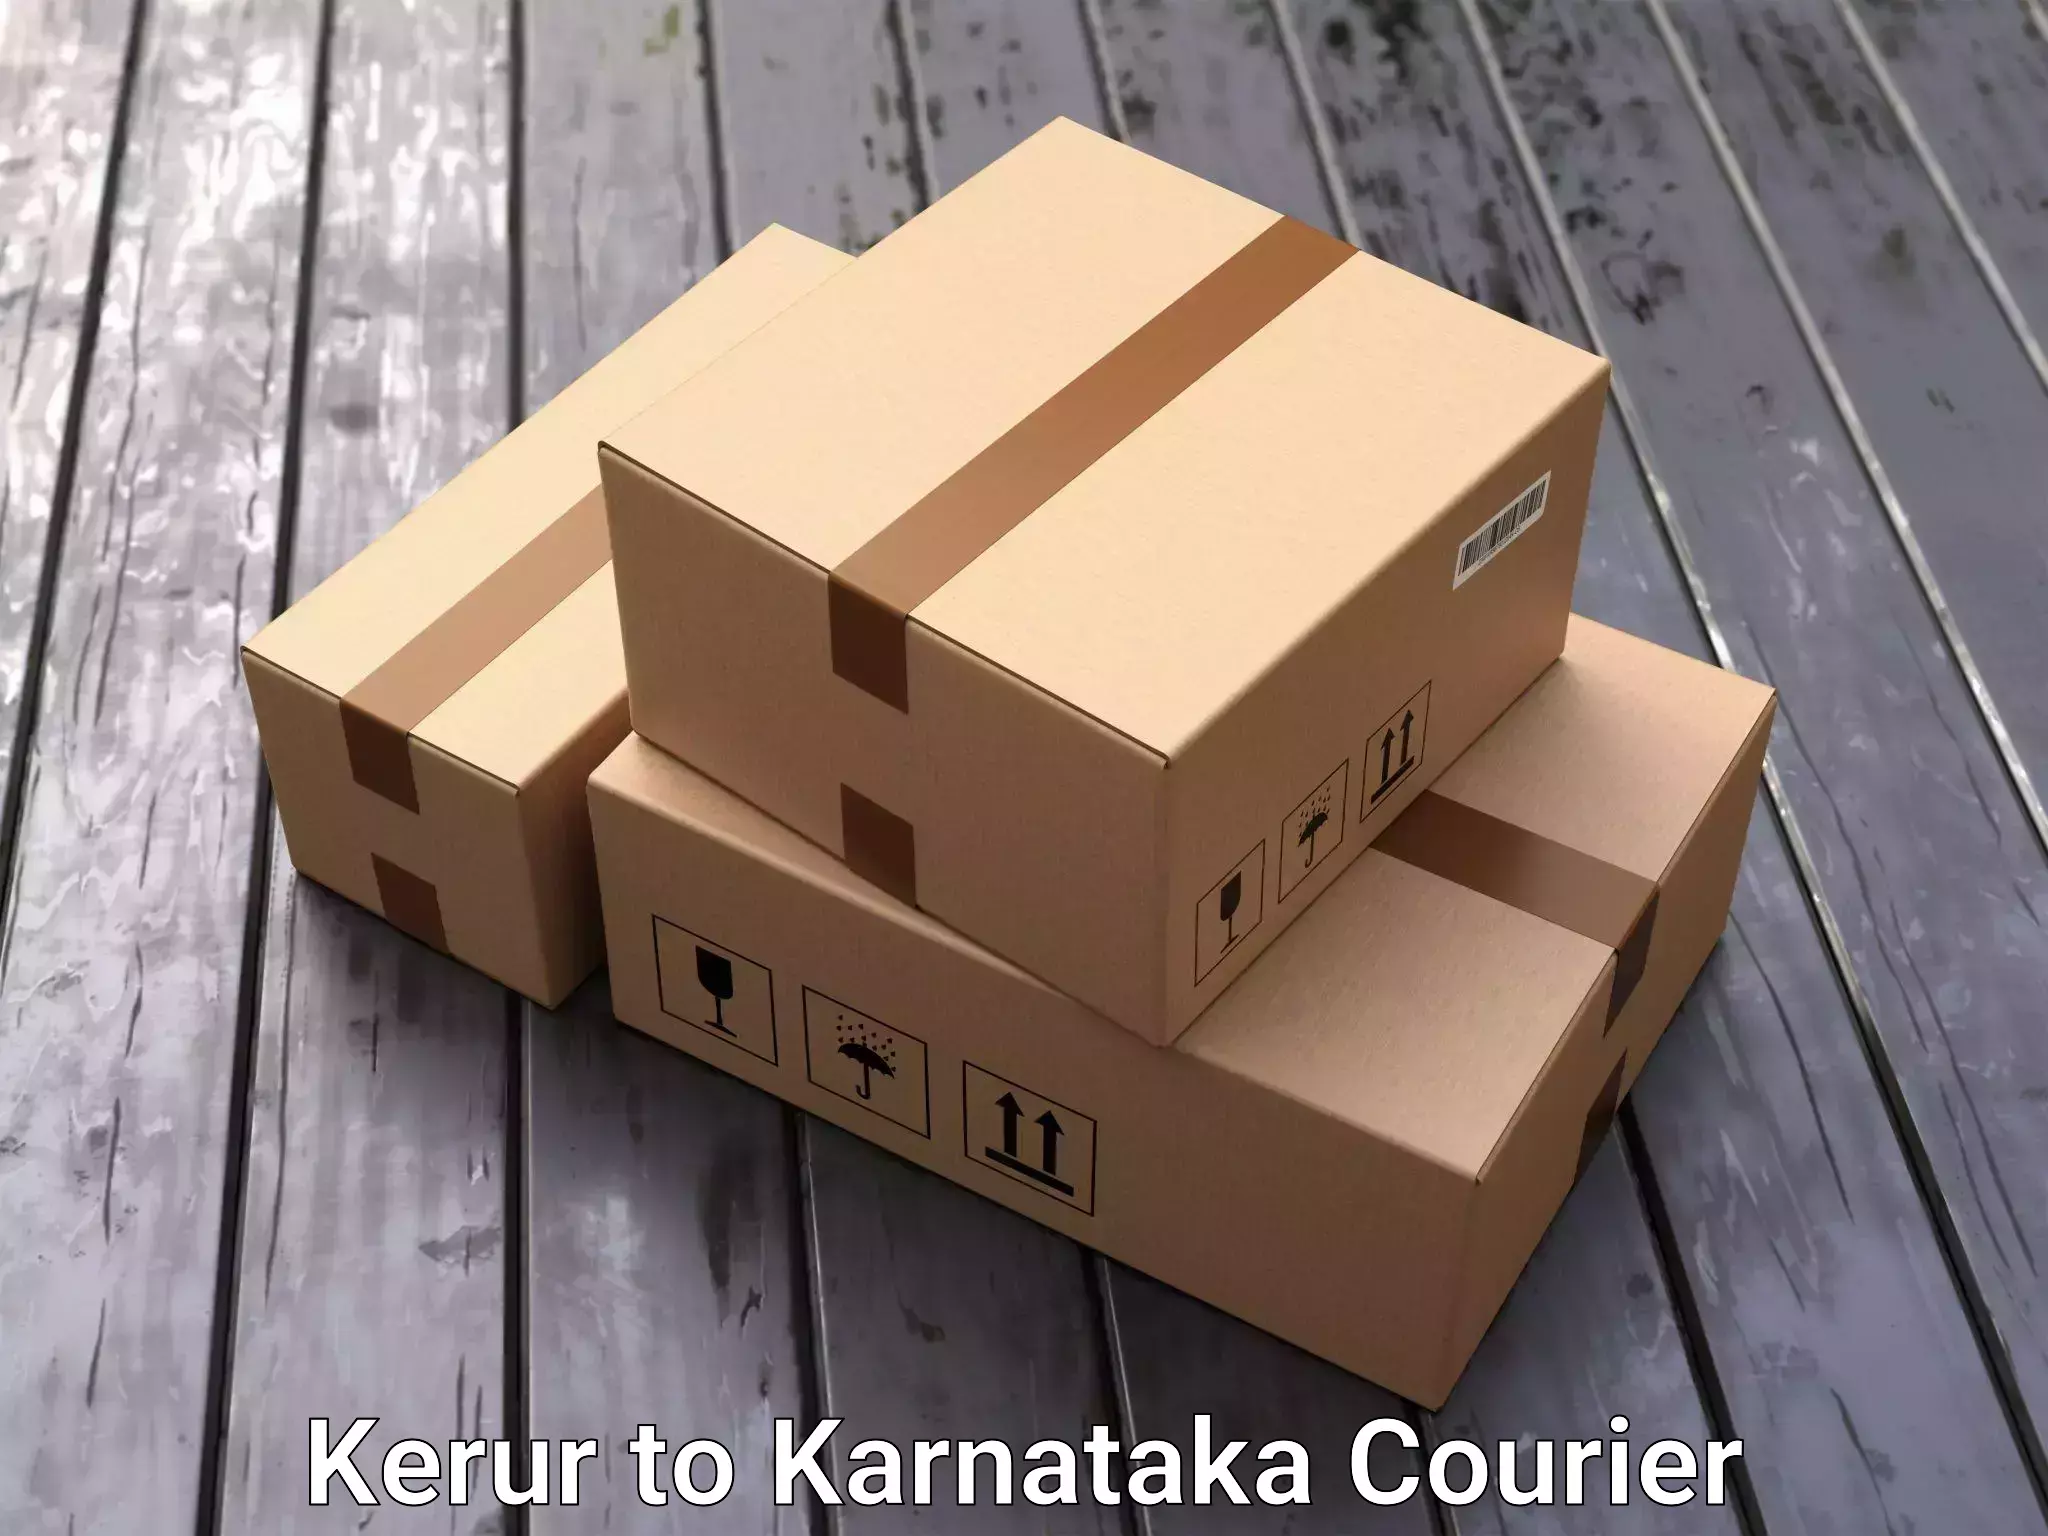 Quality relocation services in Kerur to Belgaum